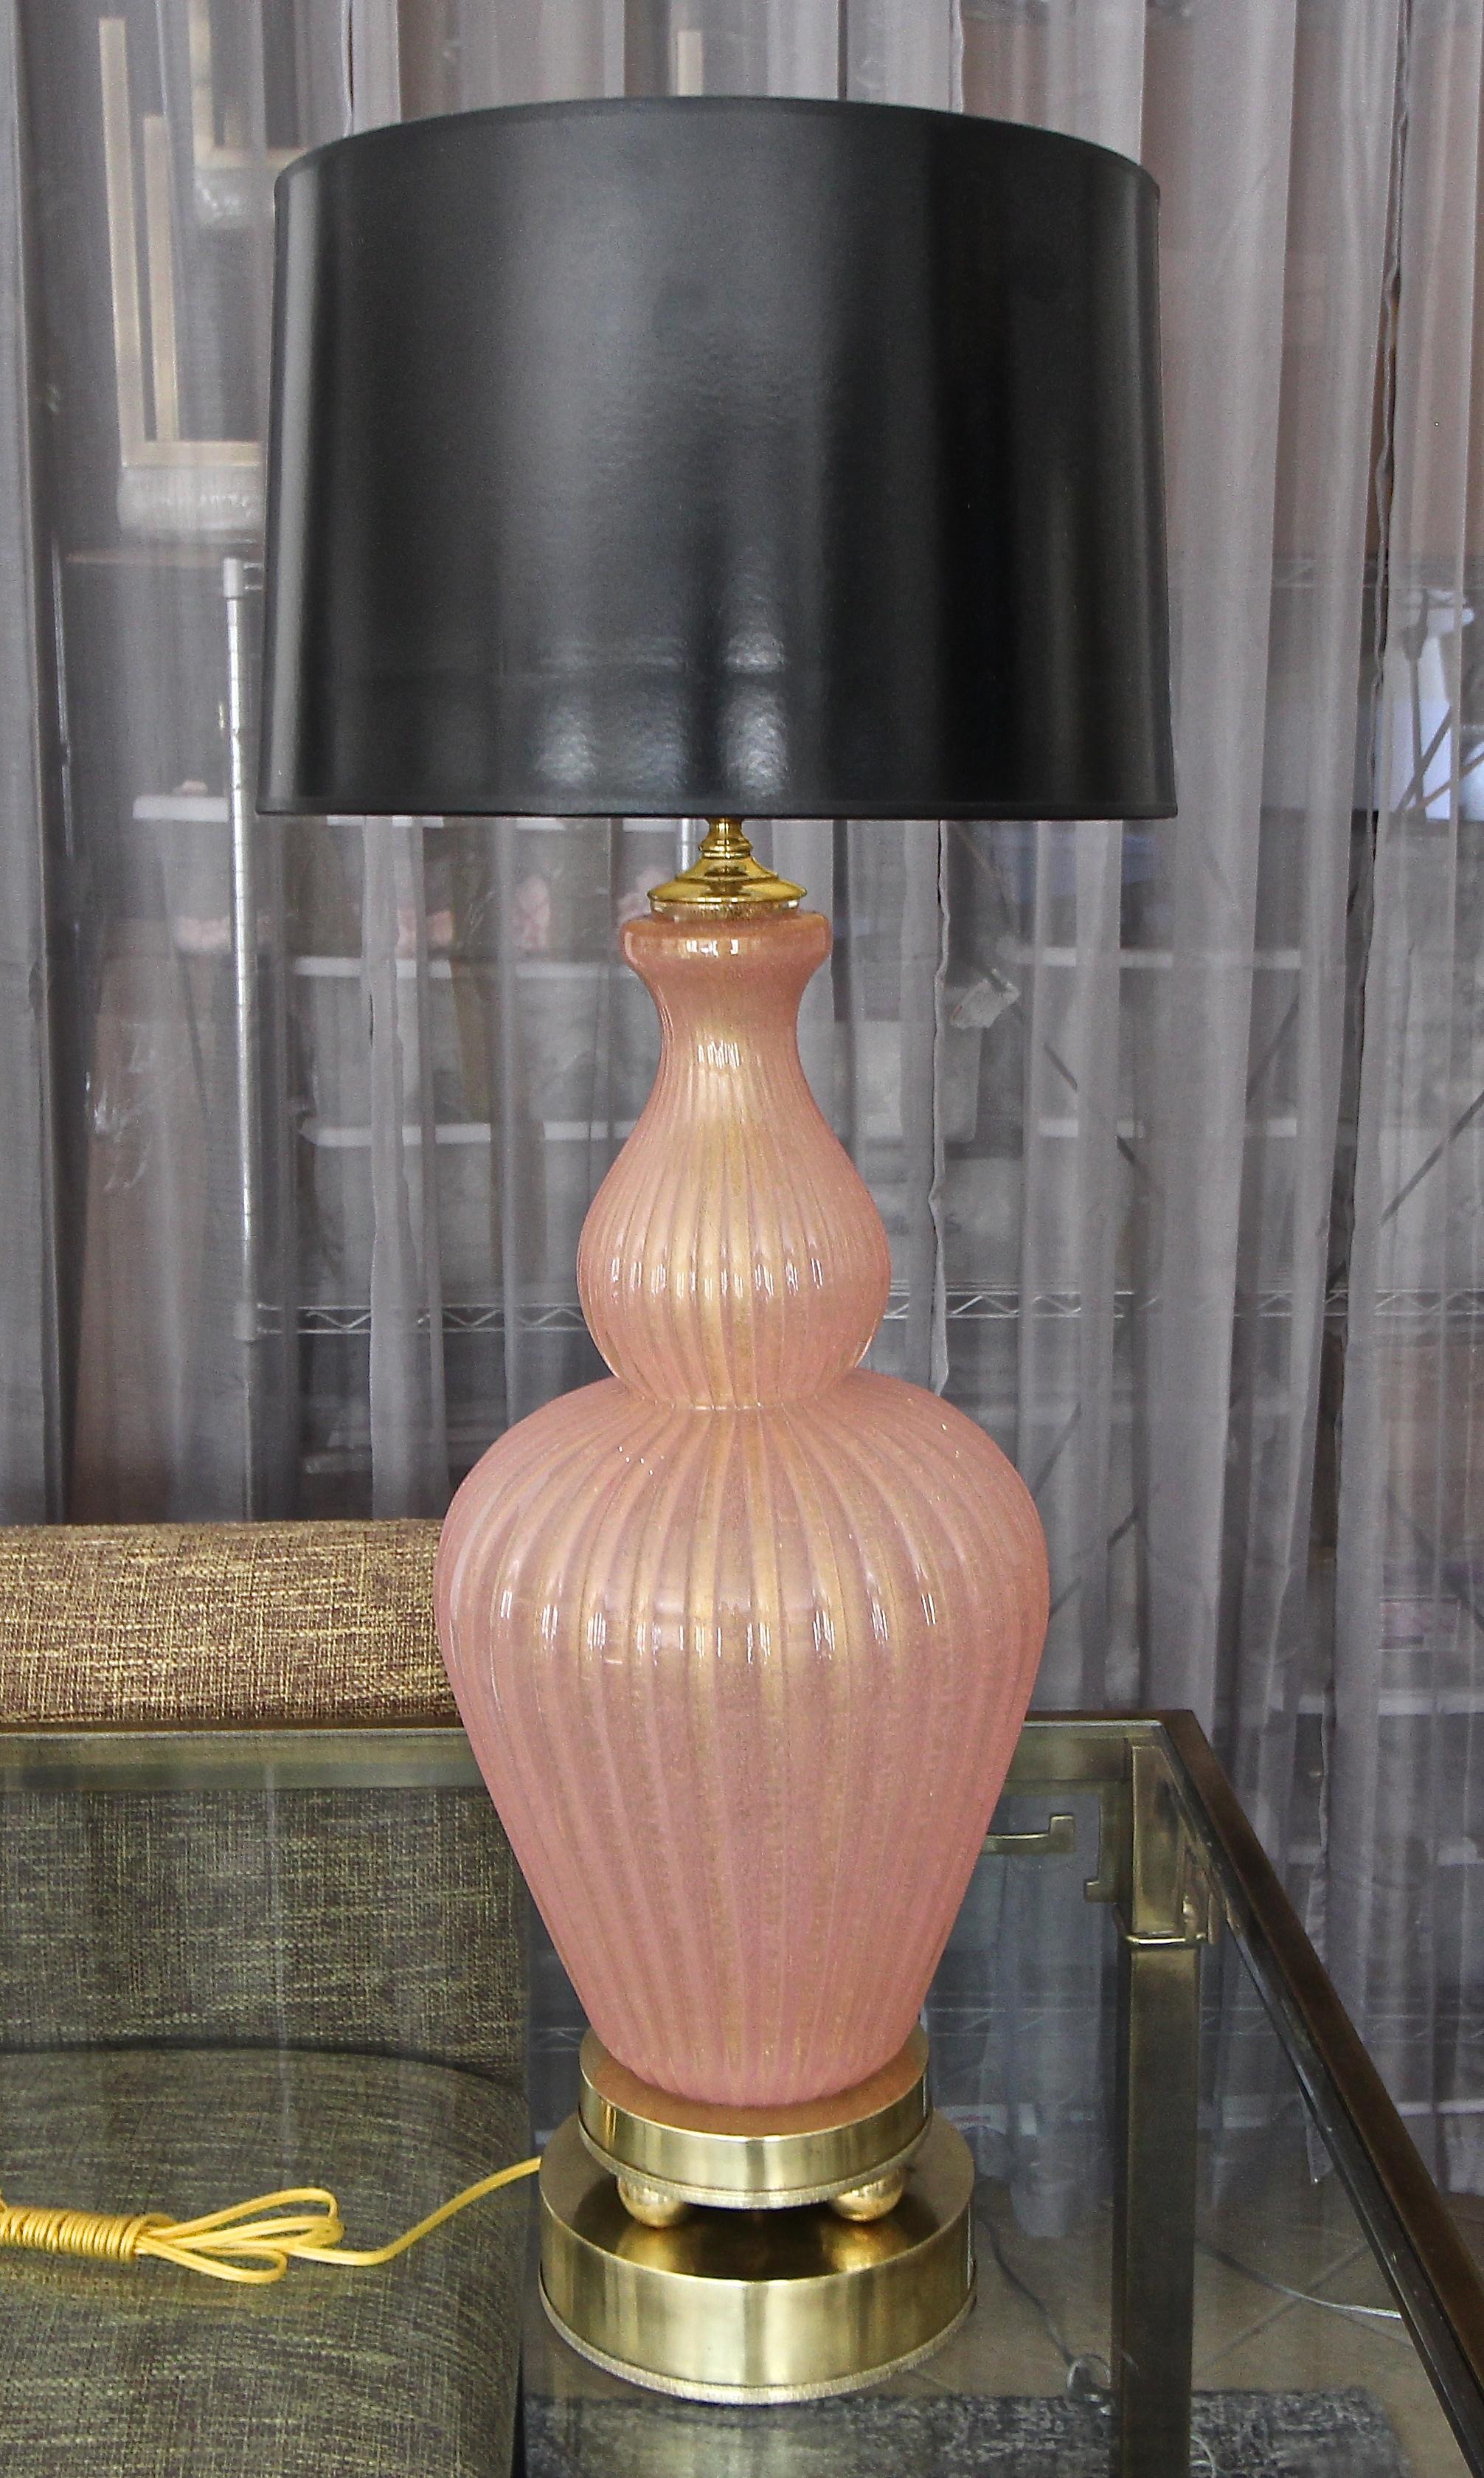 Large scale Murano Italian hand blown pink or salmon ribbed glass table lamp with gold inclusions. The large scale heavy constructed blown glass rests on original solid deco style brass base. Made by Barovier & Toso. Rewired with new three-way